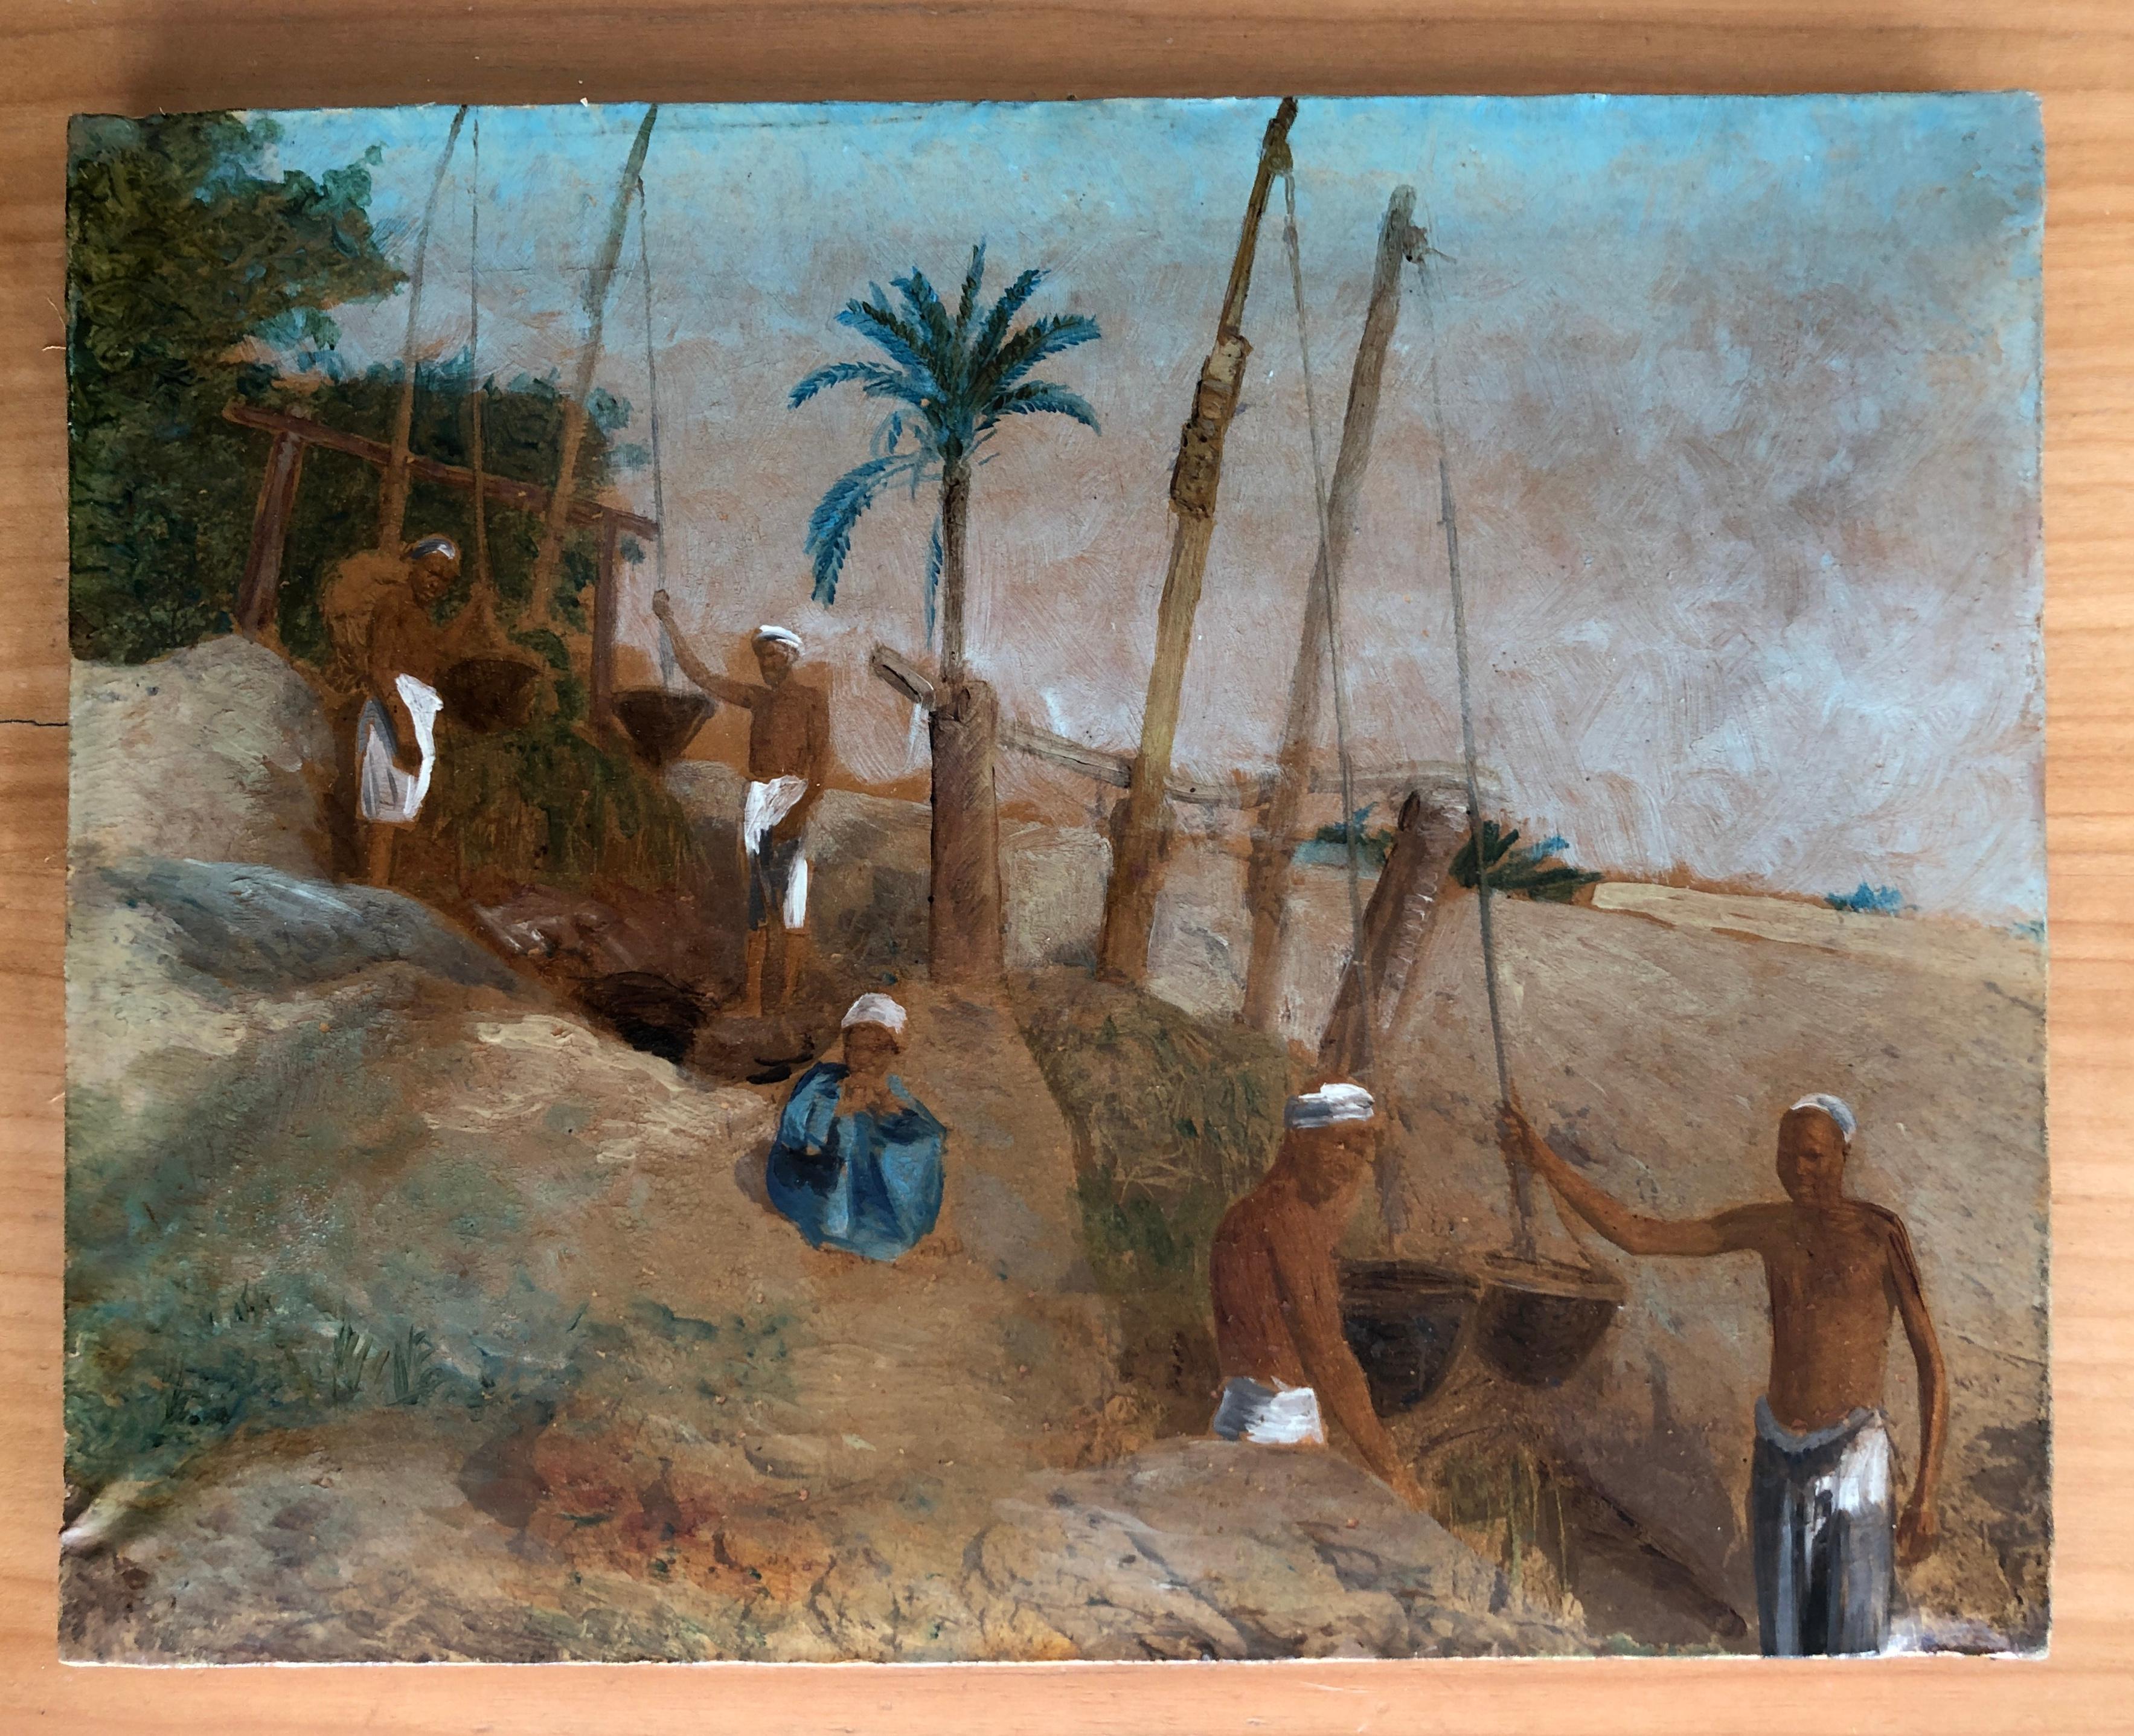 Men drawing water from oases - Painting by Spilioti